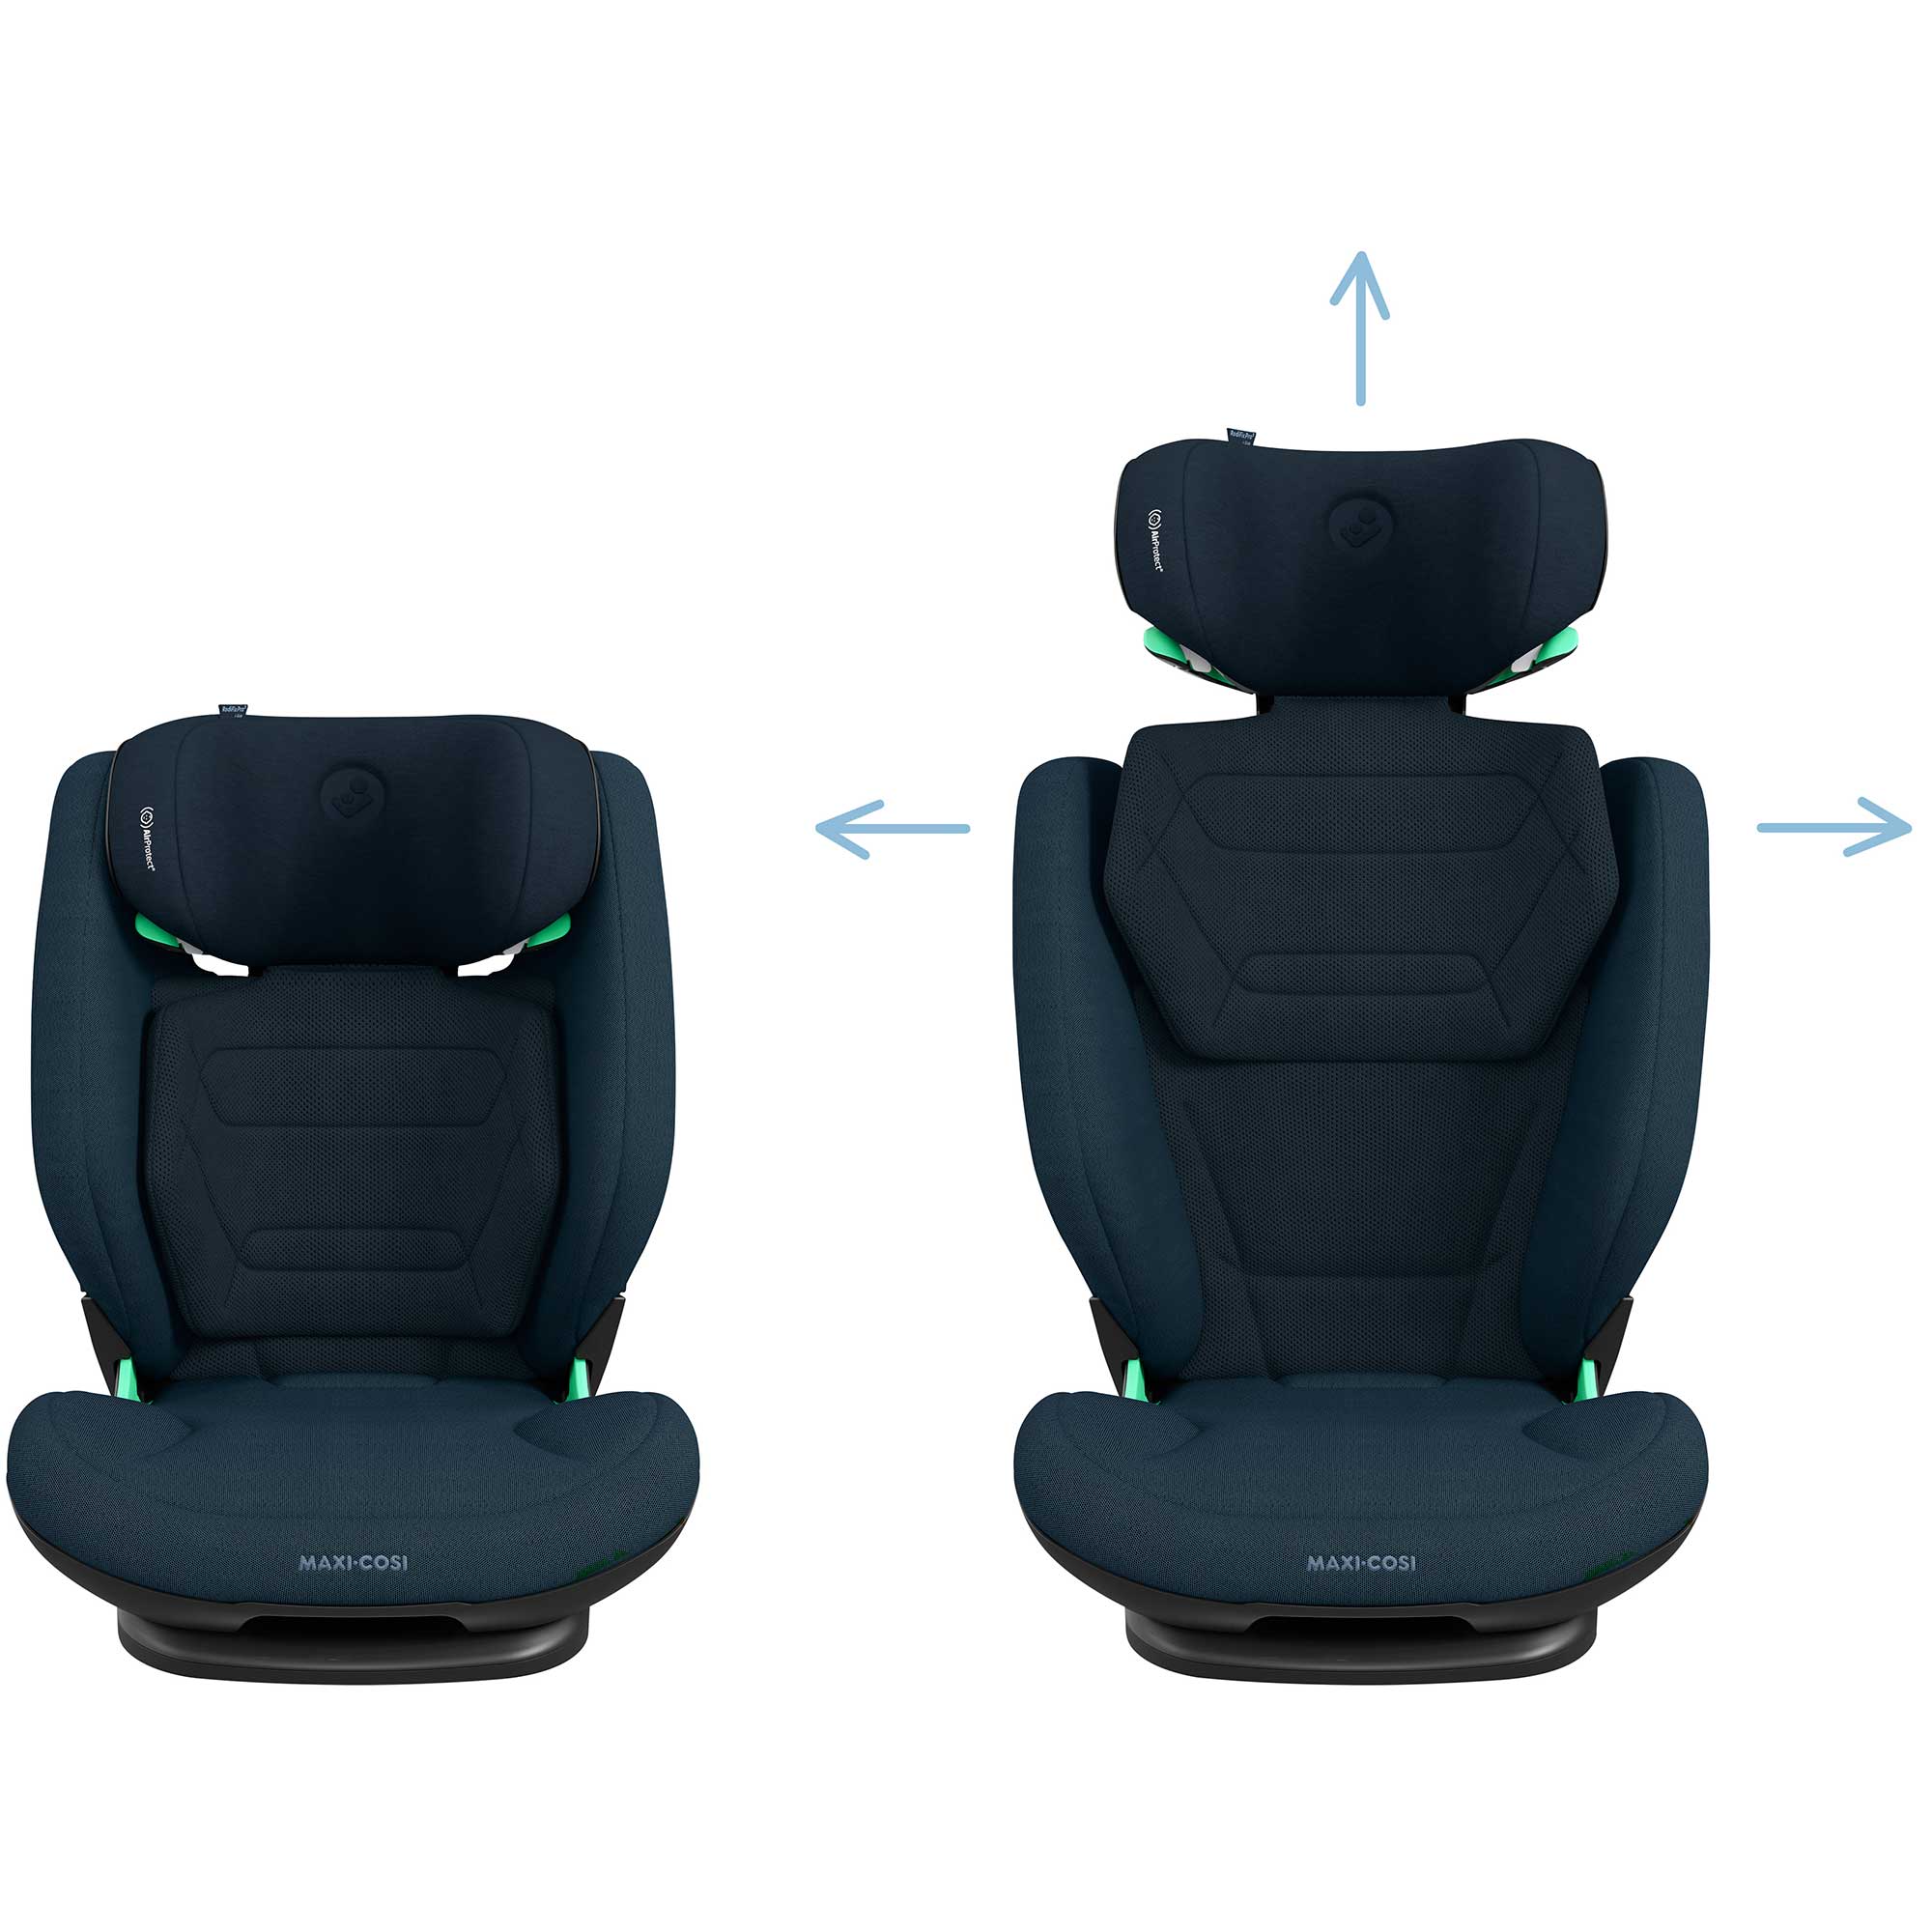 Maxi-Cosi Rodifix Pro 2 i-size Booster Seat in Authentic Blue Highback Booster Seats 8800477110 8712930186755